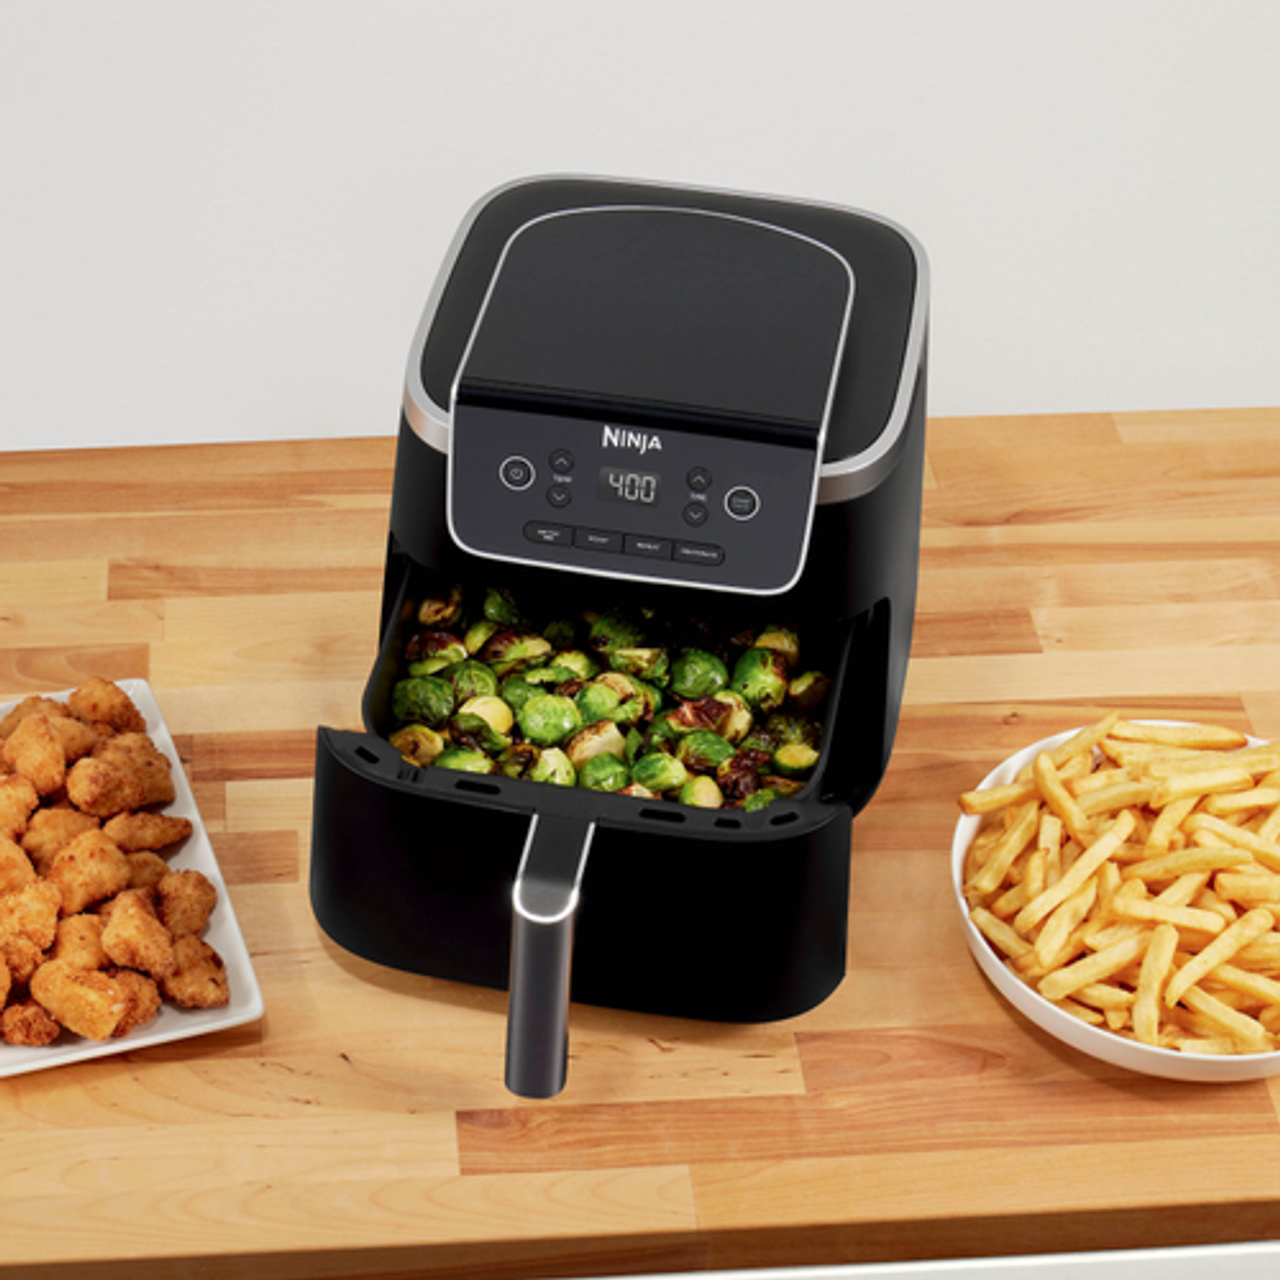 Ninja - Air Fryer Pro 4-in-1 with 5 QT Capacity - Gray